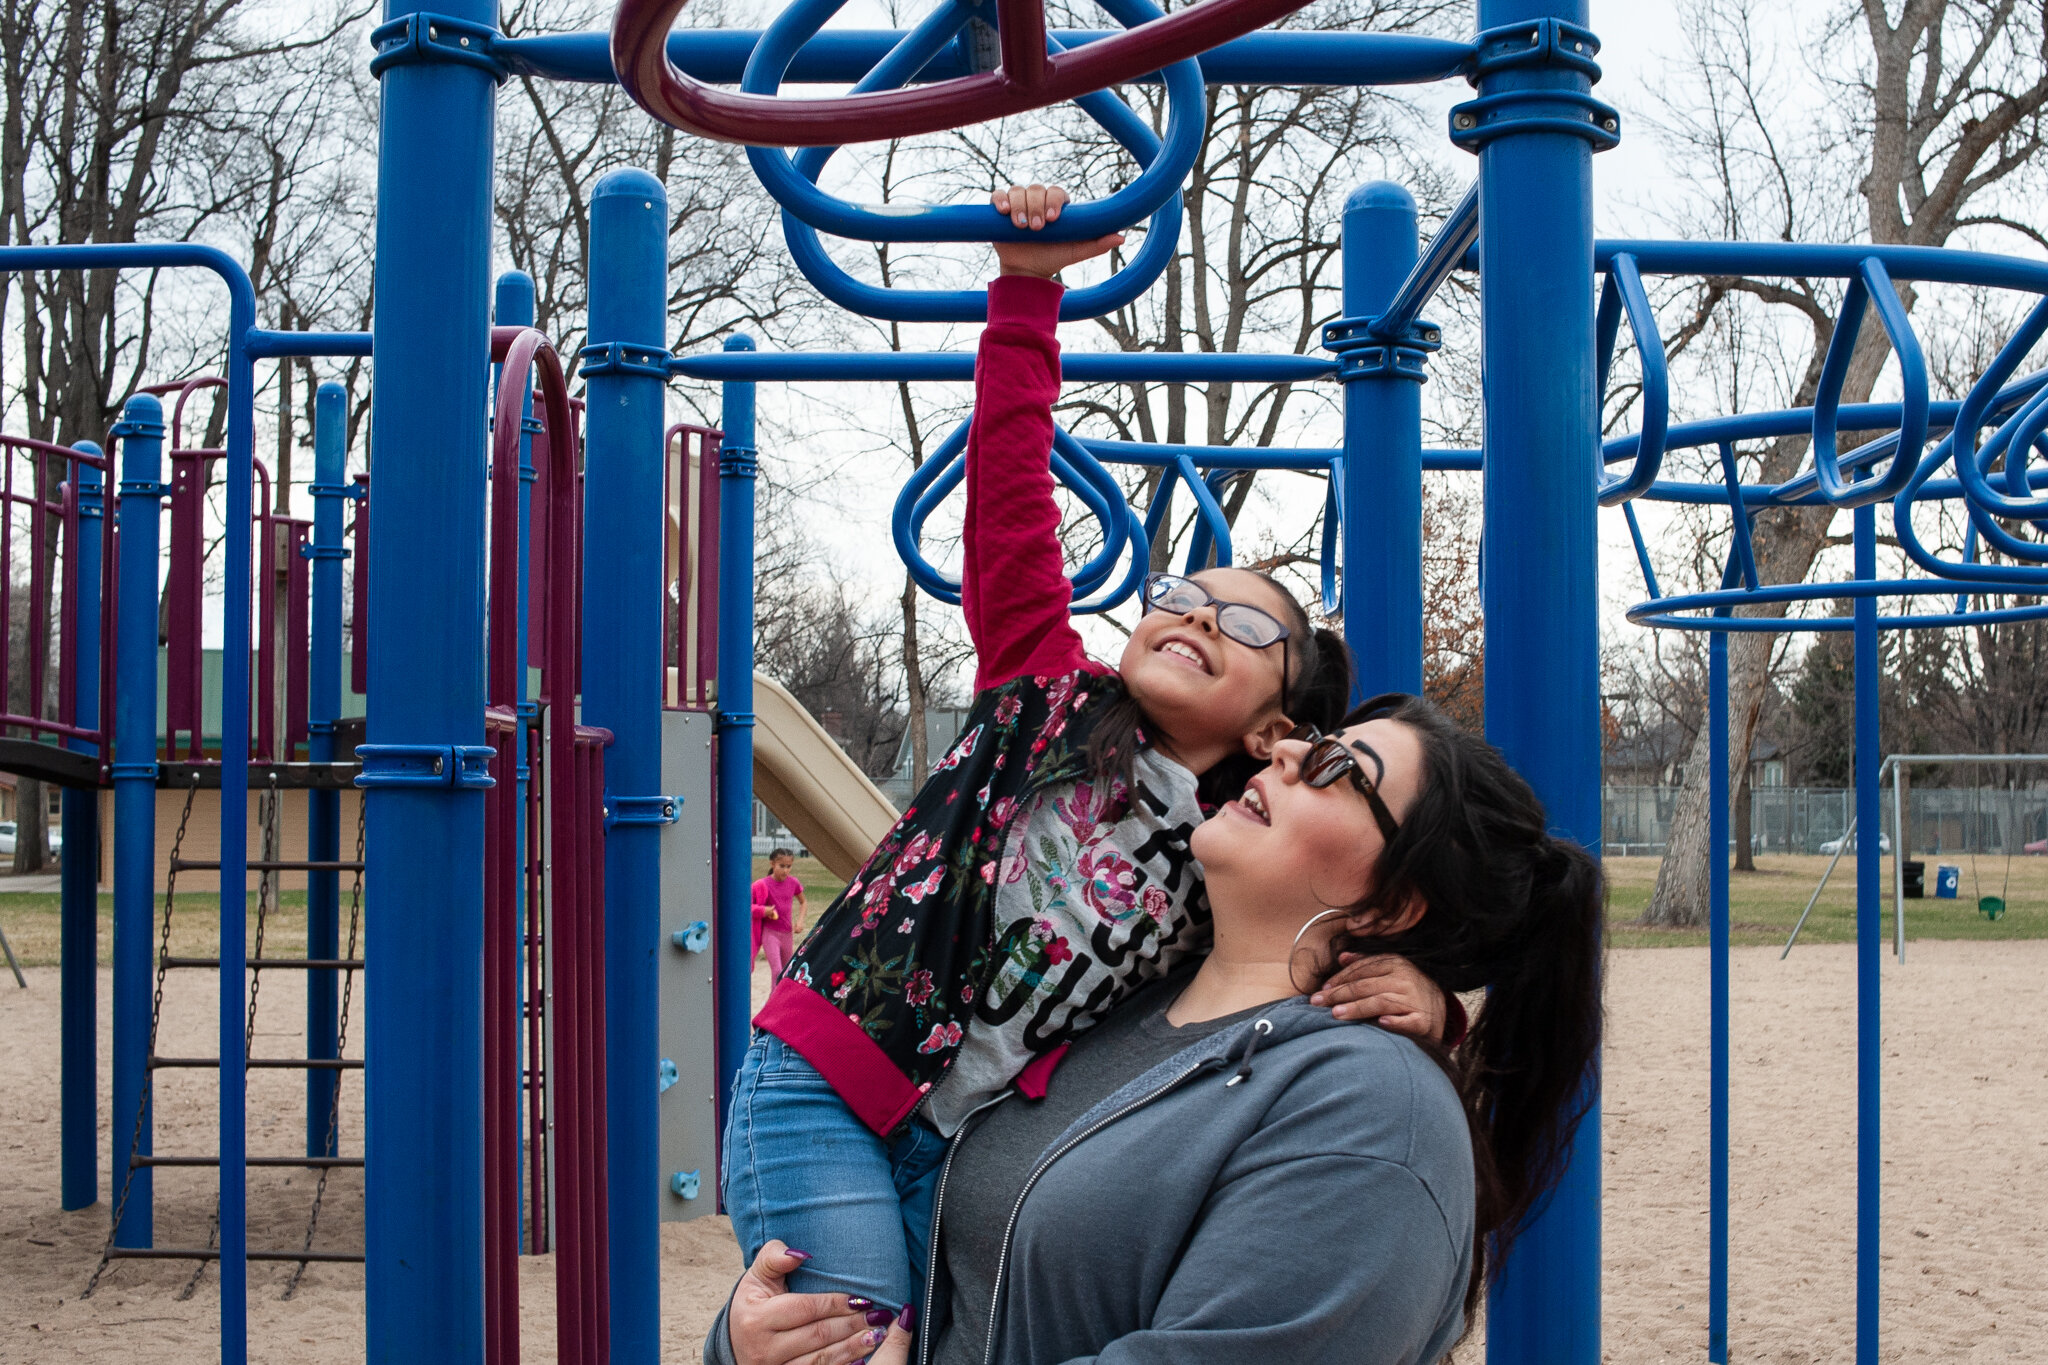  Fylesha Martinez helps her daughter Monica Martinez, 7, reach the monkey bars at City Park in Fort Collins on Wednesday, March 18, 2020.  “We’re being more cautious with hand sanitizer, but we’re not going to live in fear,” Martinez said. (Valerie M